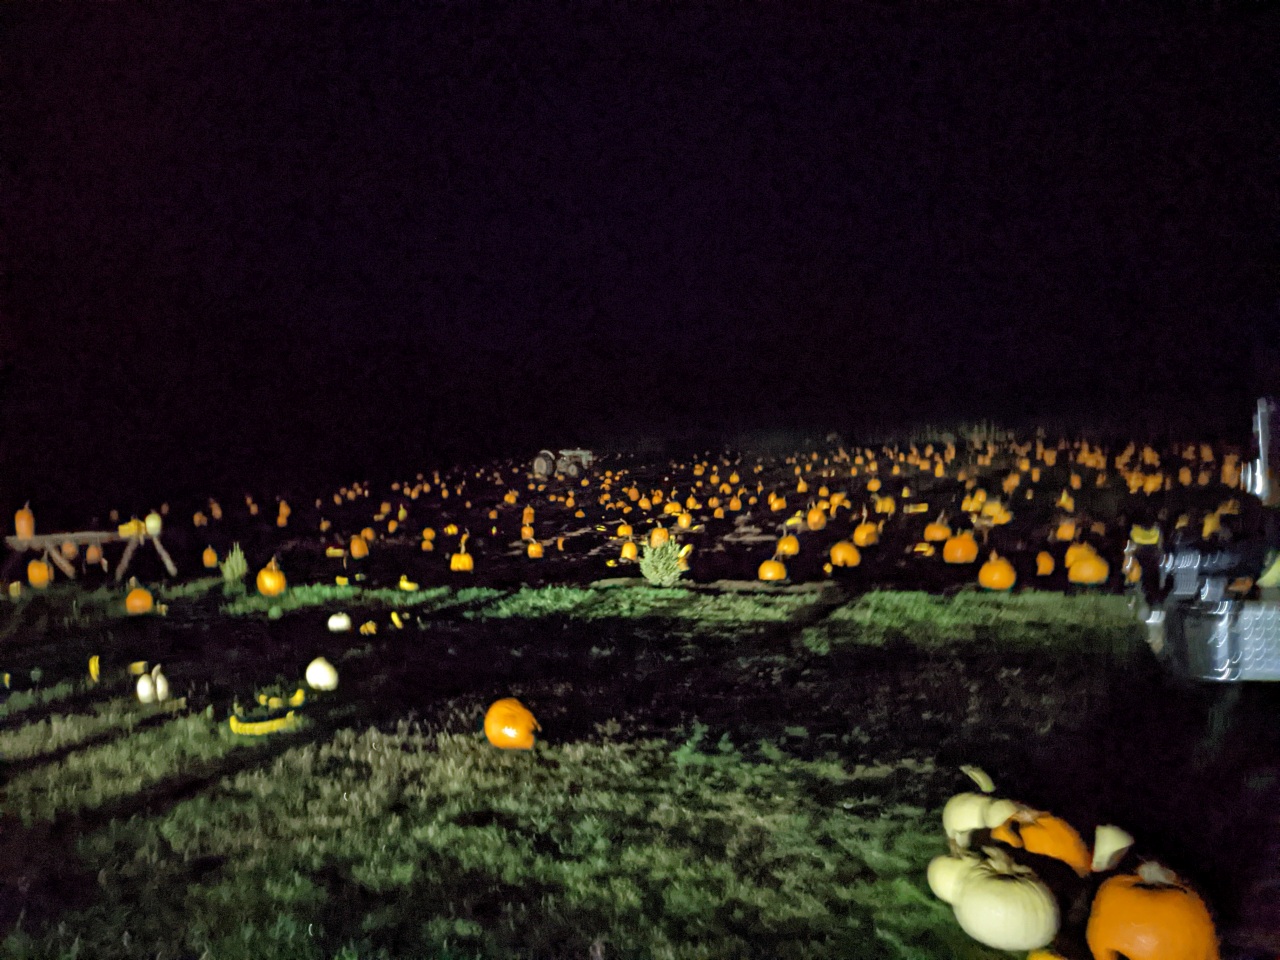 Pumpkin patch, or a bunch of pumpkins that they just stuck in the dirt?